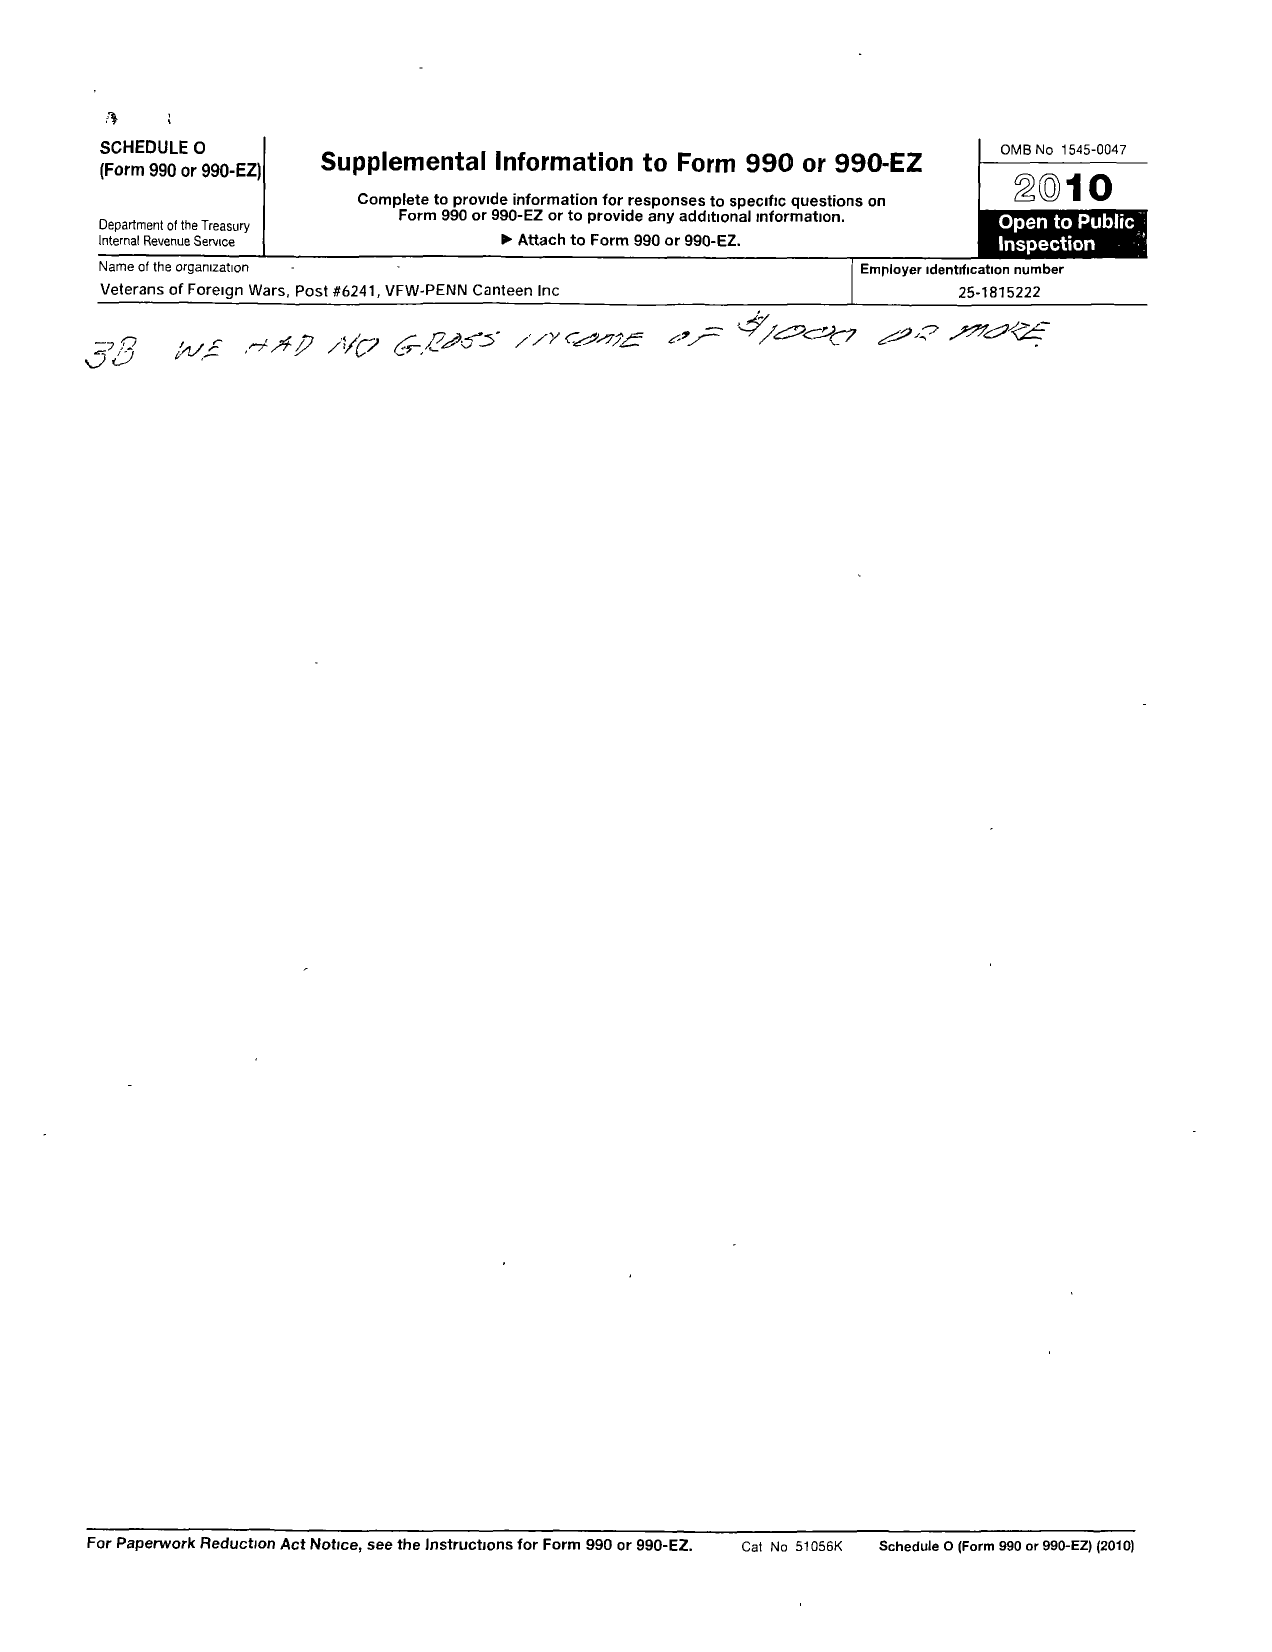 Image of first page of 2010 Form 990OR for Vfw-Penn Canteen